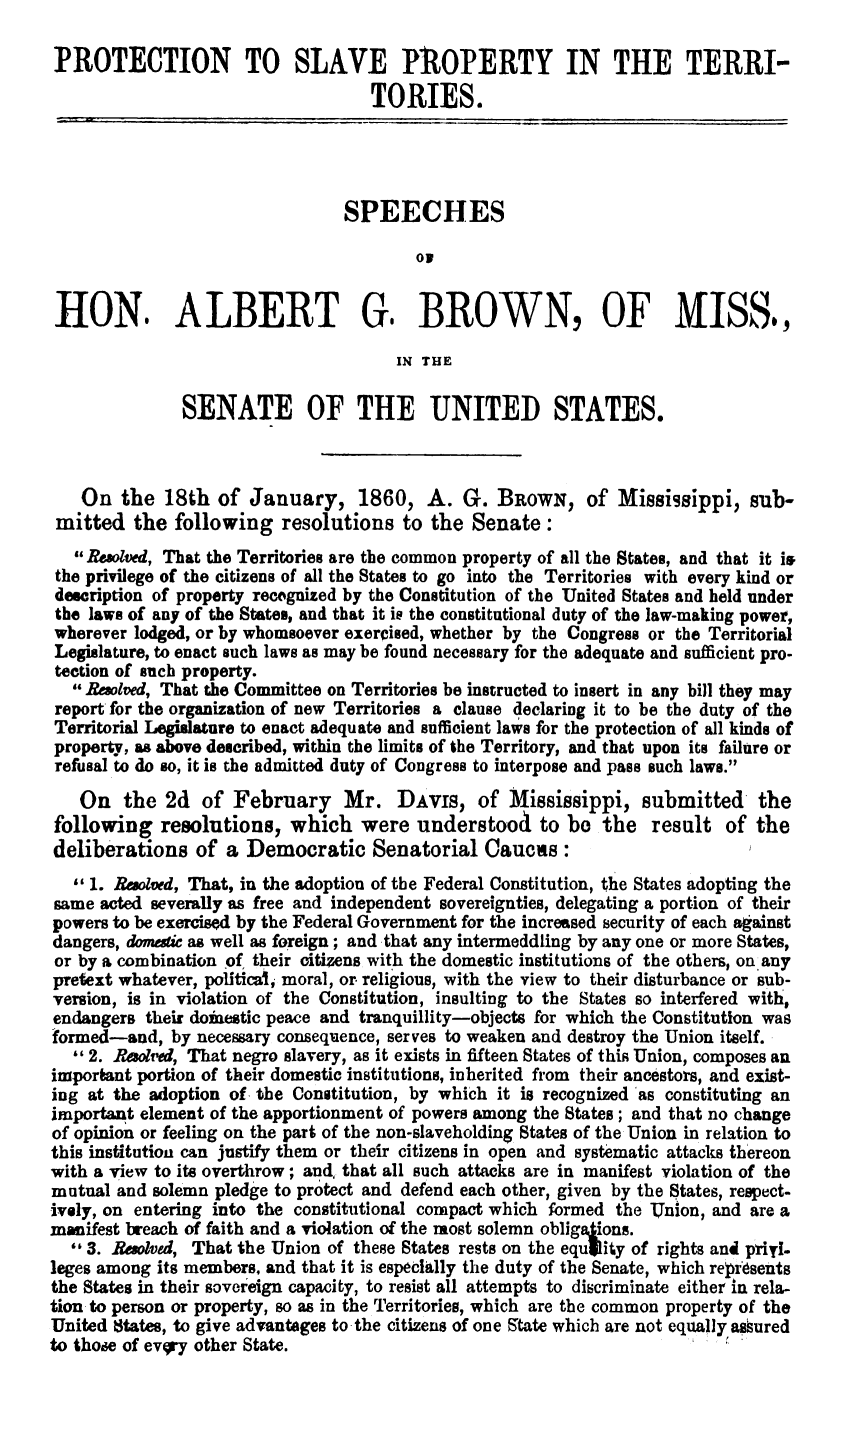 handle is hein.slavery/shagbm0001 and id is 1 raw text is: 

PROTECTION TO SLAVE PROPERTY IN THE TERRI-
                                    TORIES.




                                 SPEECHES

                                         ON


 HON. ALBERT G. BROWN, OF MISS.,

                                       IN THE

               SENATE OF THE UNITED STATES.



   On   the  18th  of January, 1860, A. G. BROWN, of Mississippi, sub-
 mitted  the  following   resolutions  to the  Senate:
   Resolved, That the Territories are the common property of all the States, and that it is
 the privilege of the citizens of all the States to go into the Territories with every kind or
 description of property recognized by the Constitution of the United States and held under
 the laws of any of the States, and that it is the constitutional duty of the law-making power,
 wherever lodged, or by whomsoever exerCised, whether by the Congress or the Territorial
 Legislature, to enact such laws as may be found necessary for the adequate and sufficient pro-
 tection of such property.
    Besolved, That the Committee on Territories be instructed to insert in any bill they may
 report for the organization of new Territories a clause declaring it to be the duty of the
 Territorial Legislature to enact adequate and sufficient laws for the protection of all kinds of
 property, as above described, within the limits of the Territory, and that upon its failure or
 refusal to do so, it is the admitted duty of Congress to interpose and pass such laws.
   On   the  2d  of February Mr. DAvis, of Mississippi, submitted the
following   resolutions,   which   were  understood   to  be the   result  of the
deliberations   of  a Democratic Senatorial Caucas:
   1. Resolved, That, in the adoption of the Federal Constitution, the States adopting the
same  acted severally as free and independent sovereignties, delegating a portion of their
powers to be exercised by the Federal Government for the increased security of each against
dangers, domestic as well as foreign; and that any intermeddling by any one or more States,
or by a combination of their citizens with the domestic institutions of the others, on any
pretext whatever, political, moral, or religious, with the view to their disturbance or sub-
version, is in violation of the Constitution, insulting to the States so interfered with,
endangers  their doinestic peace and tranquillity-objects for which the Constitution was
formed-and,  by necessary consequence, serves to weaken and destroy the Union itself.
    2. Resolved, That negro slavery, as it exists in fifteen States of this Union, composes an
important portion of their domestic institutions, inherited from their ancestors, and exist-
ing at the adoption of, the Constitution, by which it is recognized as constituting an
important element of the apportionment of powers among the States; and that no change
of opinion or feeling on the part of the non-slaveholding States of the Union in relation to
this institution can justify them or their citizens in open and systematic attacks thereon
with a view to its overthrow; and, that all such attacks are in manifest violation of the
mutual and solemn pledge to protect and defend each other, given by the States, respect-
ively, on entering into the constitutional compact which formed the Union, and are a
manifest breach of faith and a violation of the most solemn obligaions.
  ' 3. Resolved, That the Union of these States rests on the equjlity of rights and priyl-
leges among its members, and that it is especially the duty of the Senate, which represents
the States in their sovereign capacity, to resist all attempts to discriminate either in rela-
tion to person or property, so as in the Territories, which are the common property of the
United 8tates, to give advantages to-the citizens of one State which are not equally assured
to those of evgry other State.


